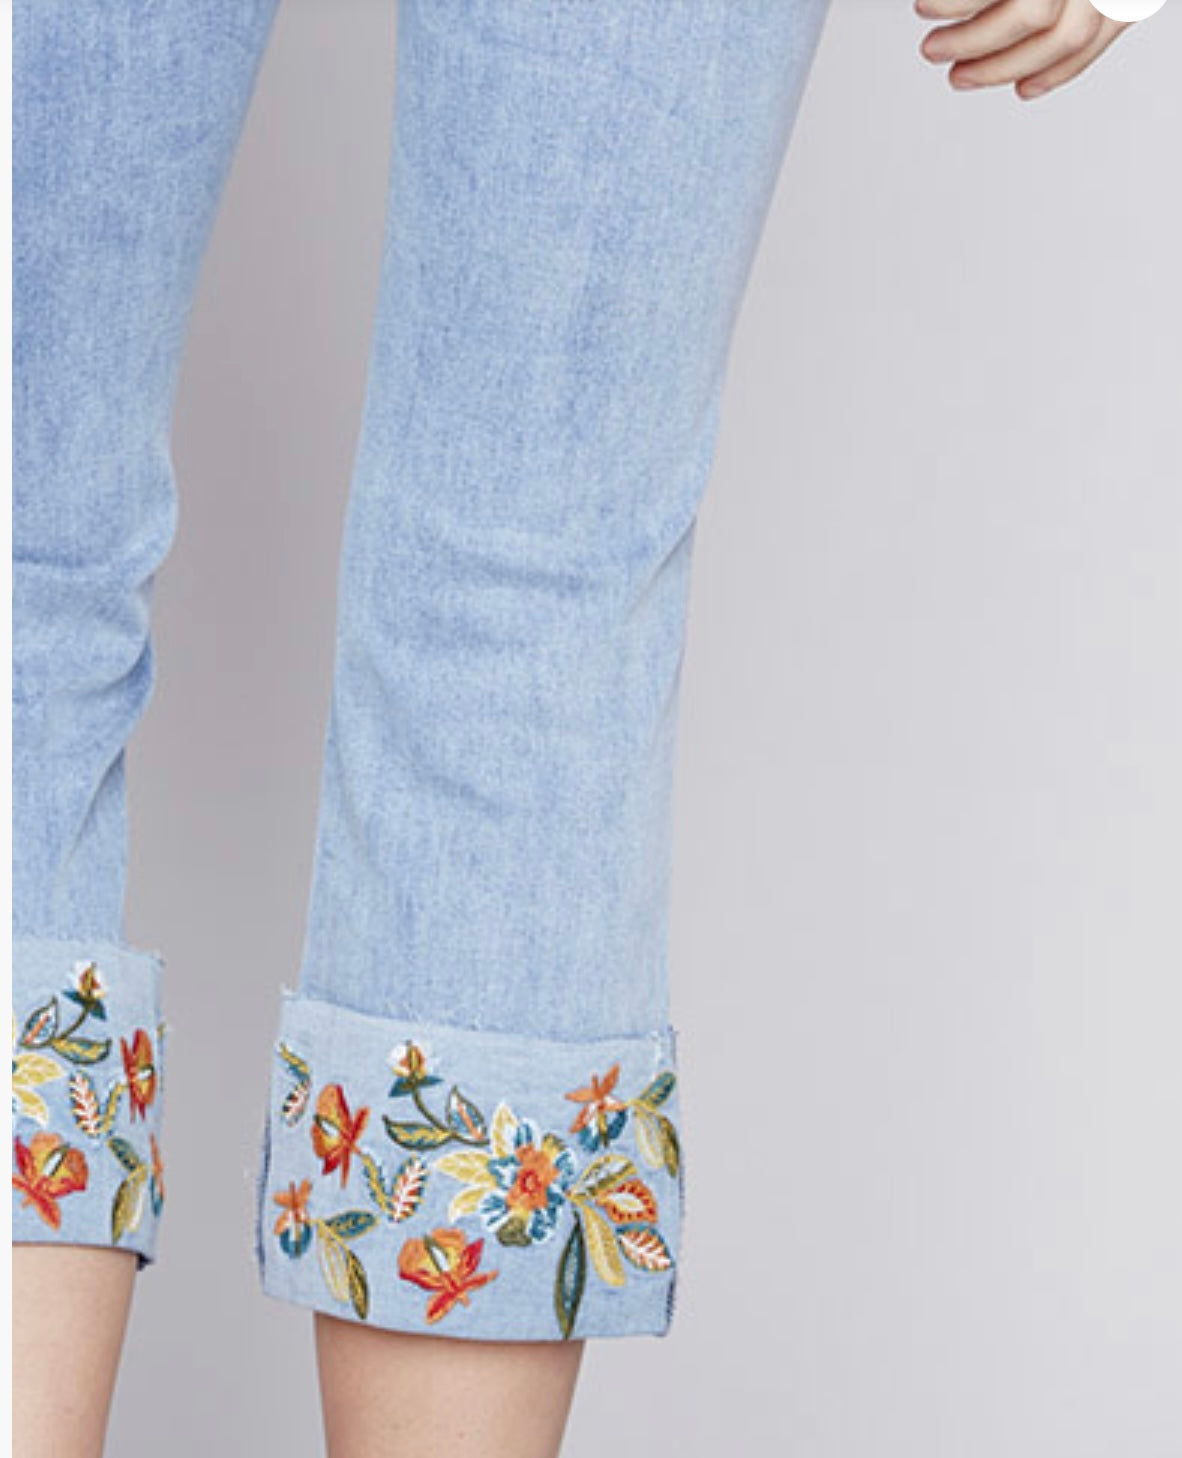 Charlie B Embroidered Cuff Jeans